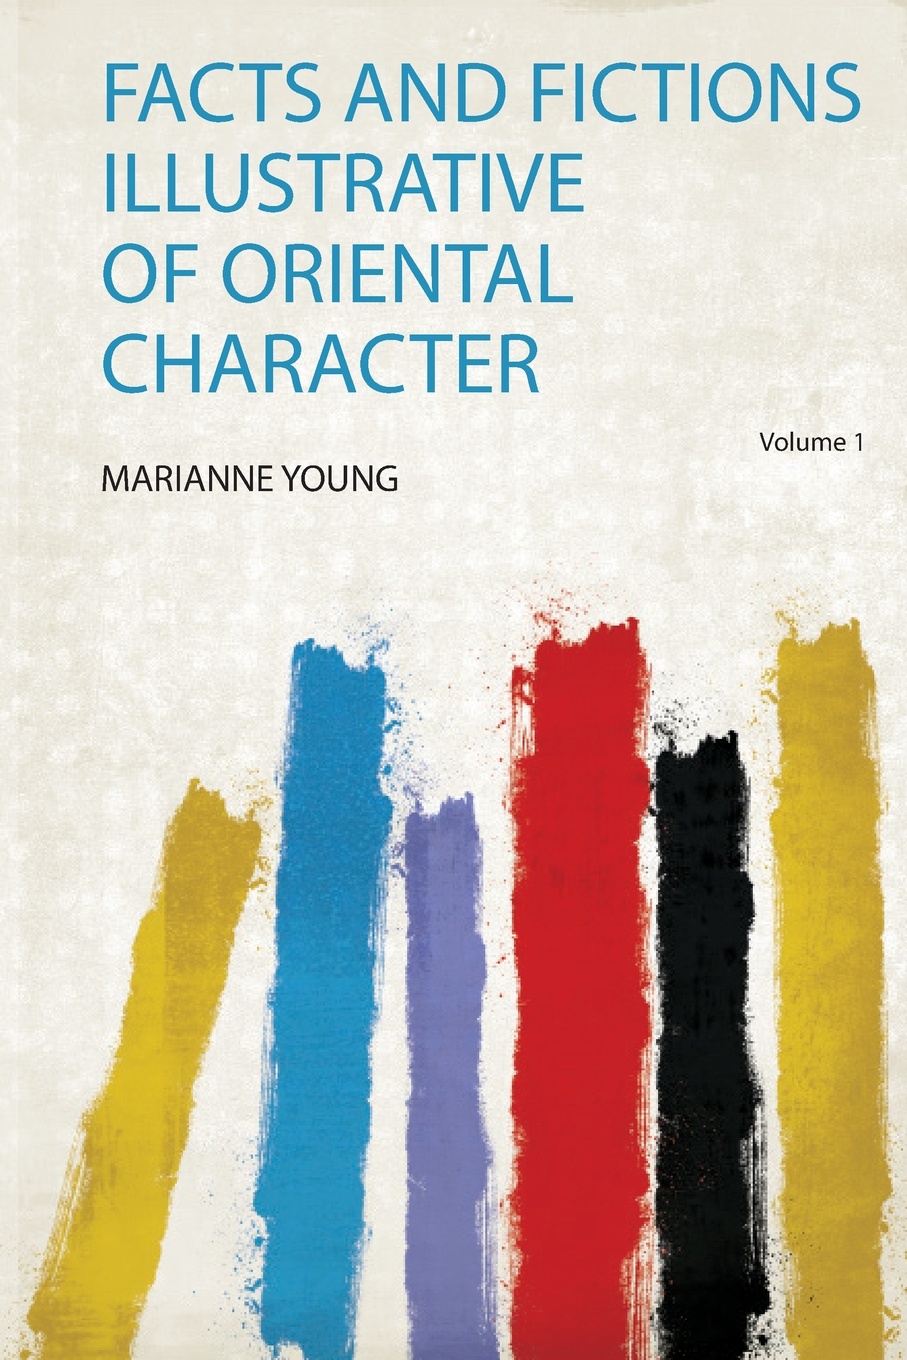 Facts and Fictions Illustrative of Oriental Character